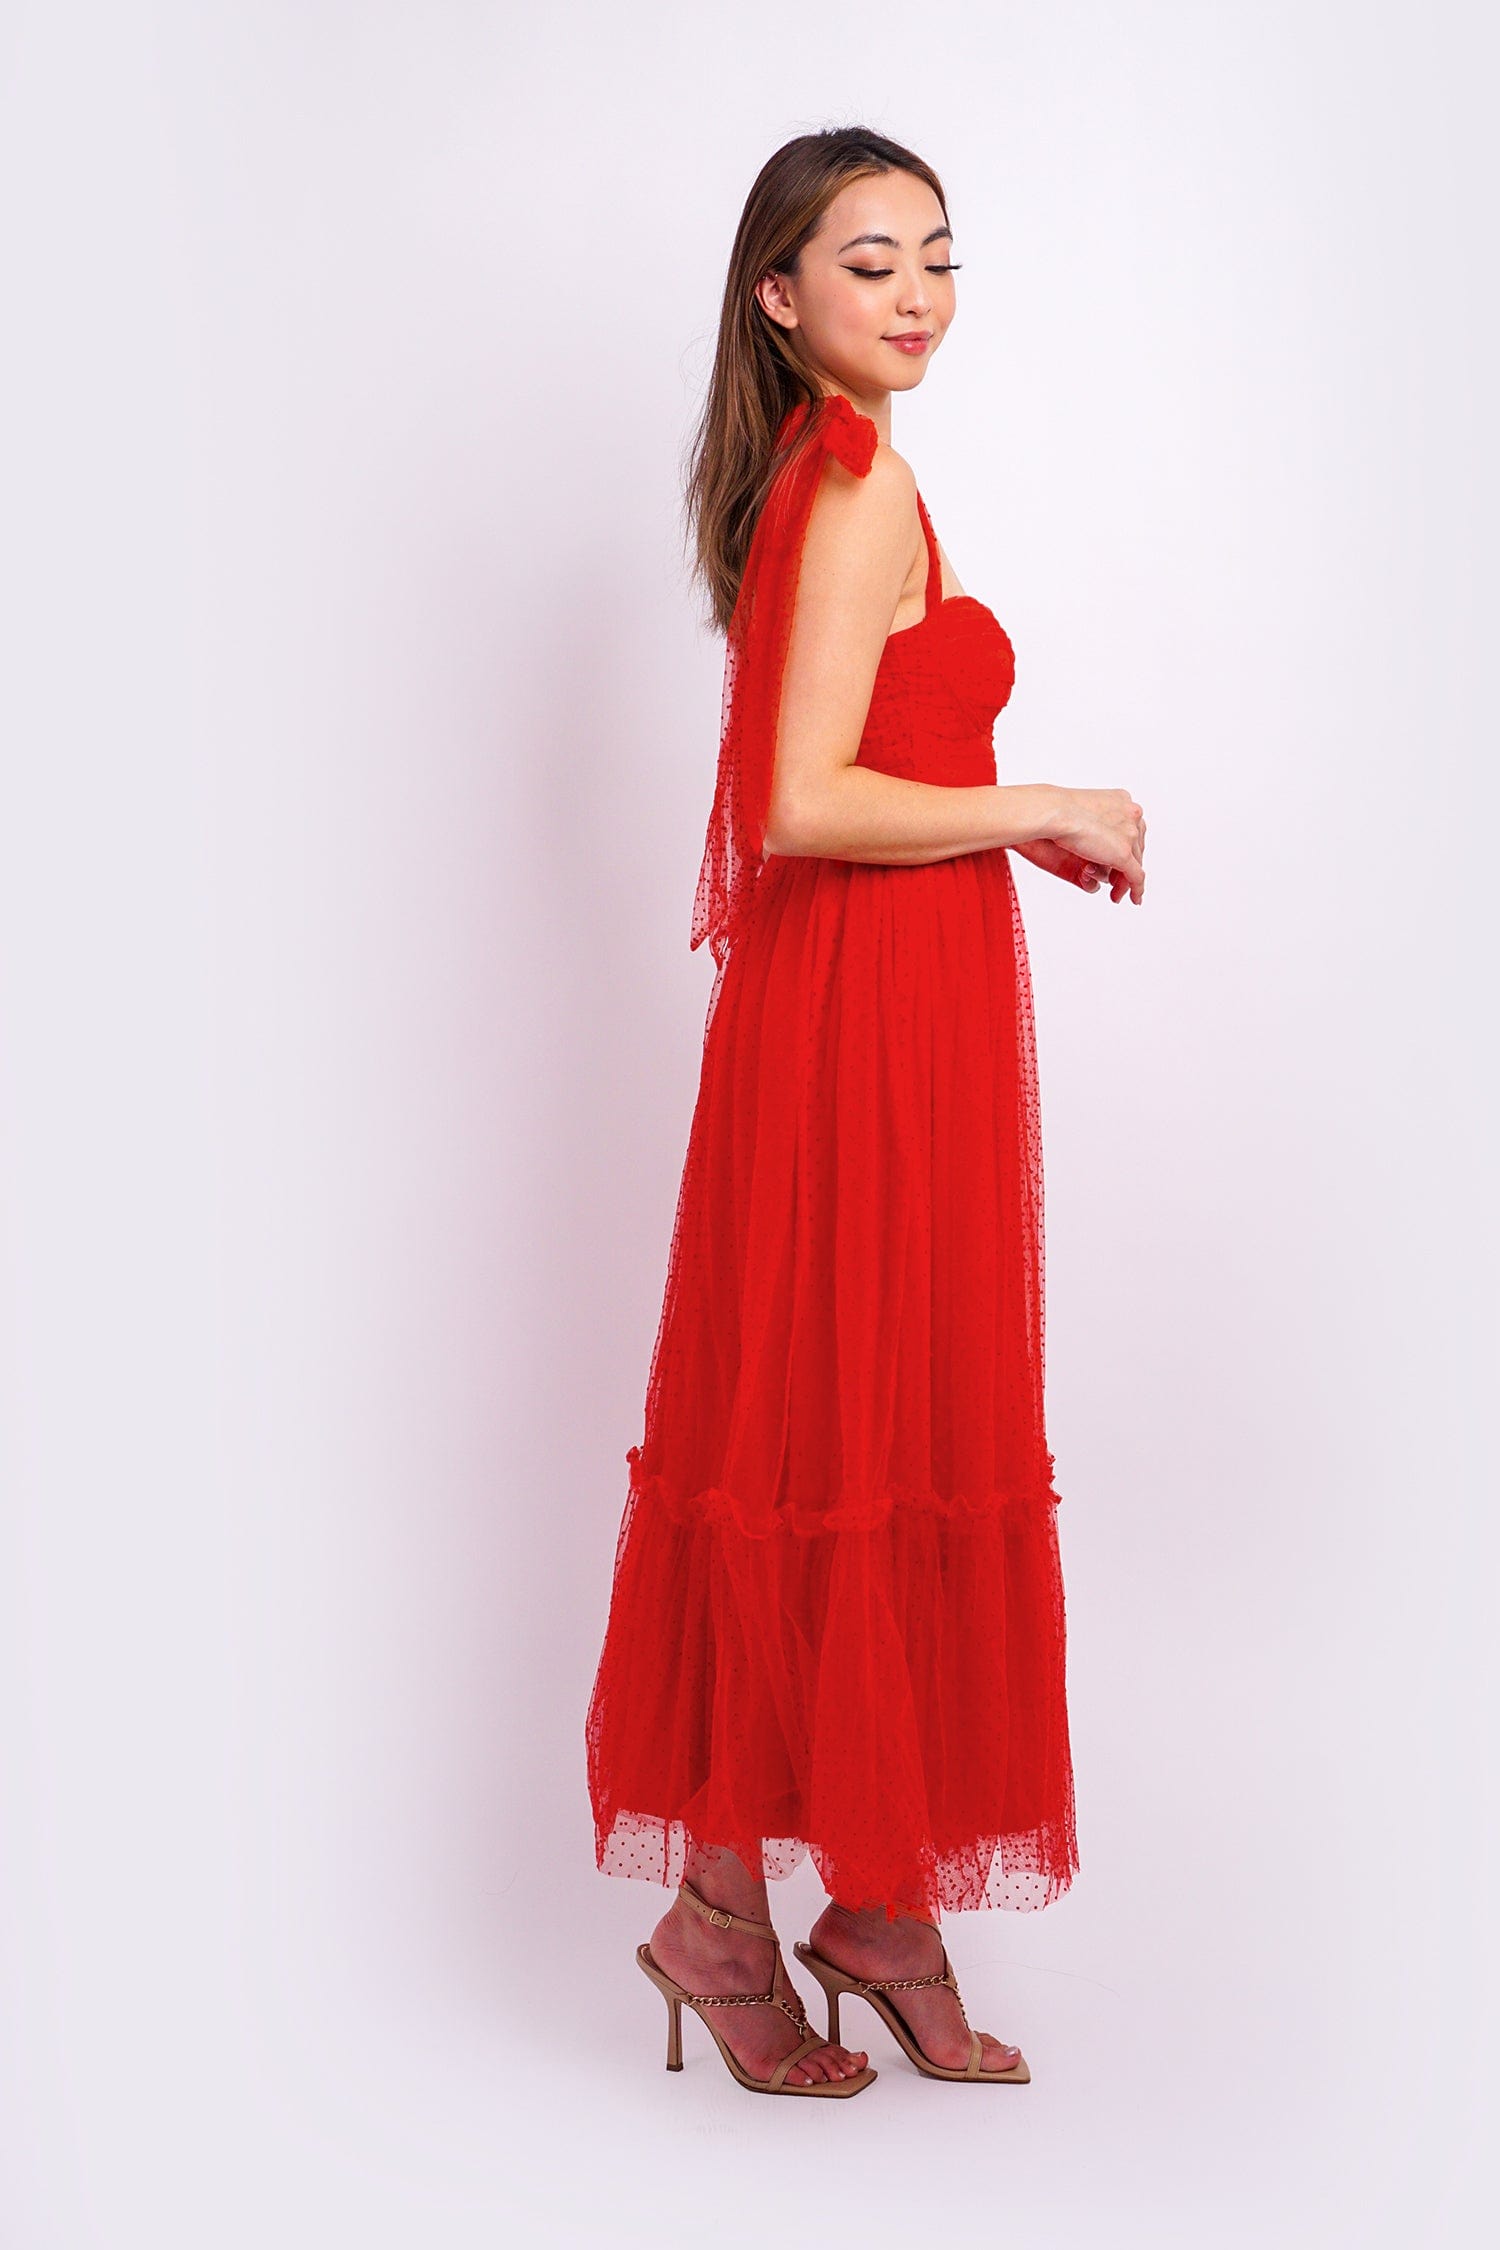 Bright Red Corset Polyester Bone Tulle Party Dress (04210402) - eDressit